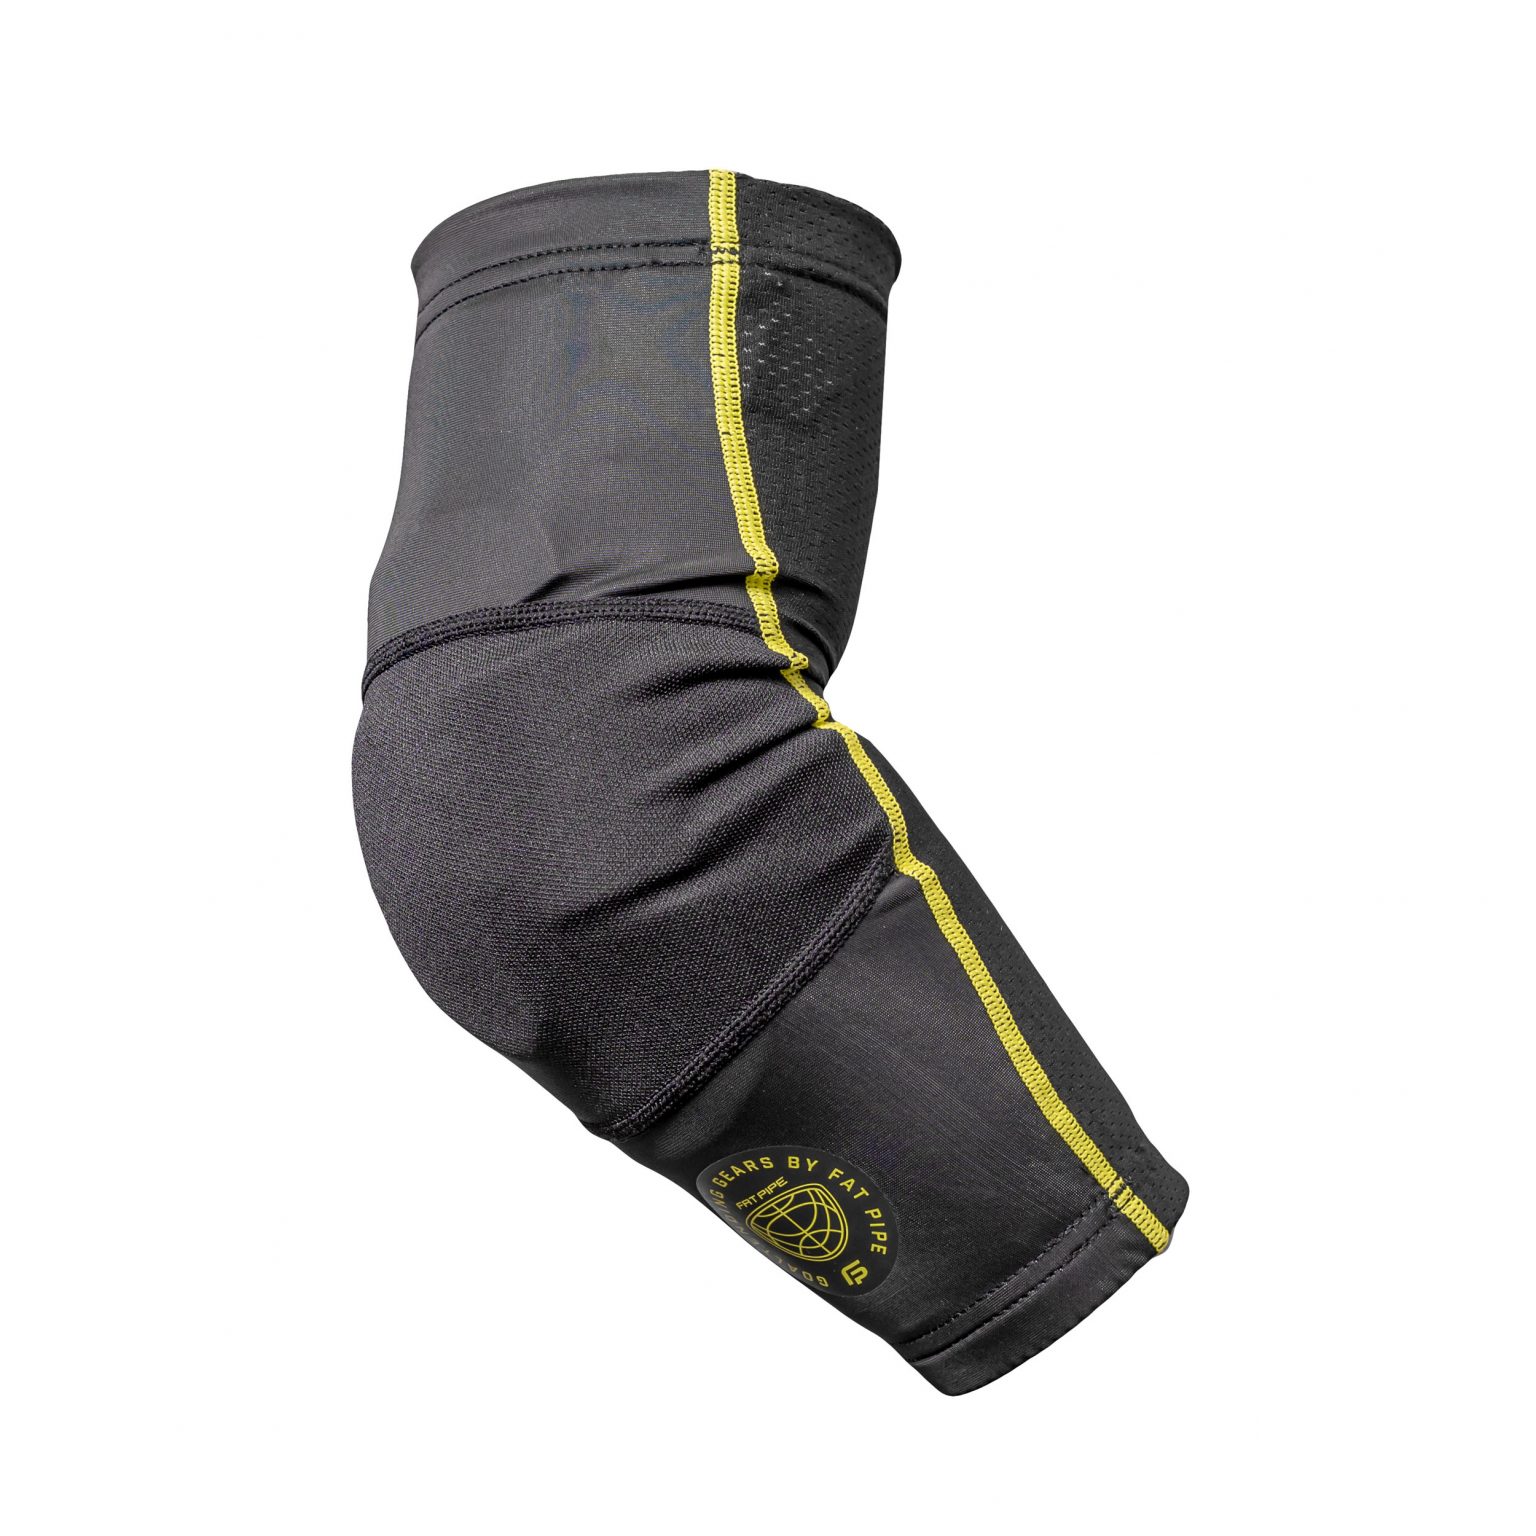 Vic-Goalkeeper's Elbow Pad Sleeves - Fat Pipe Store